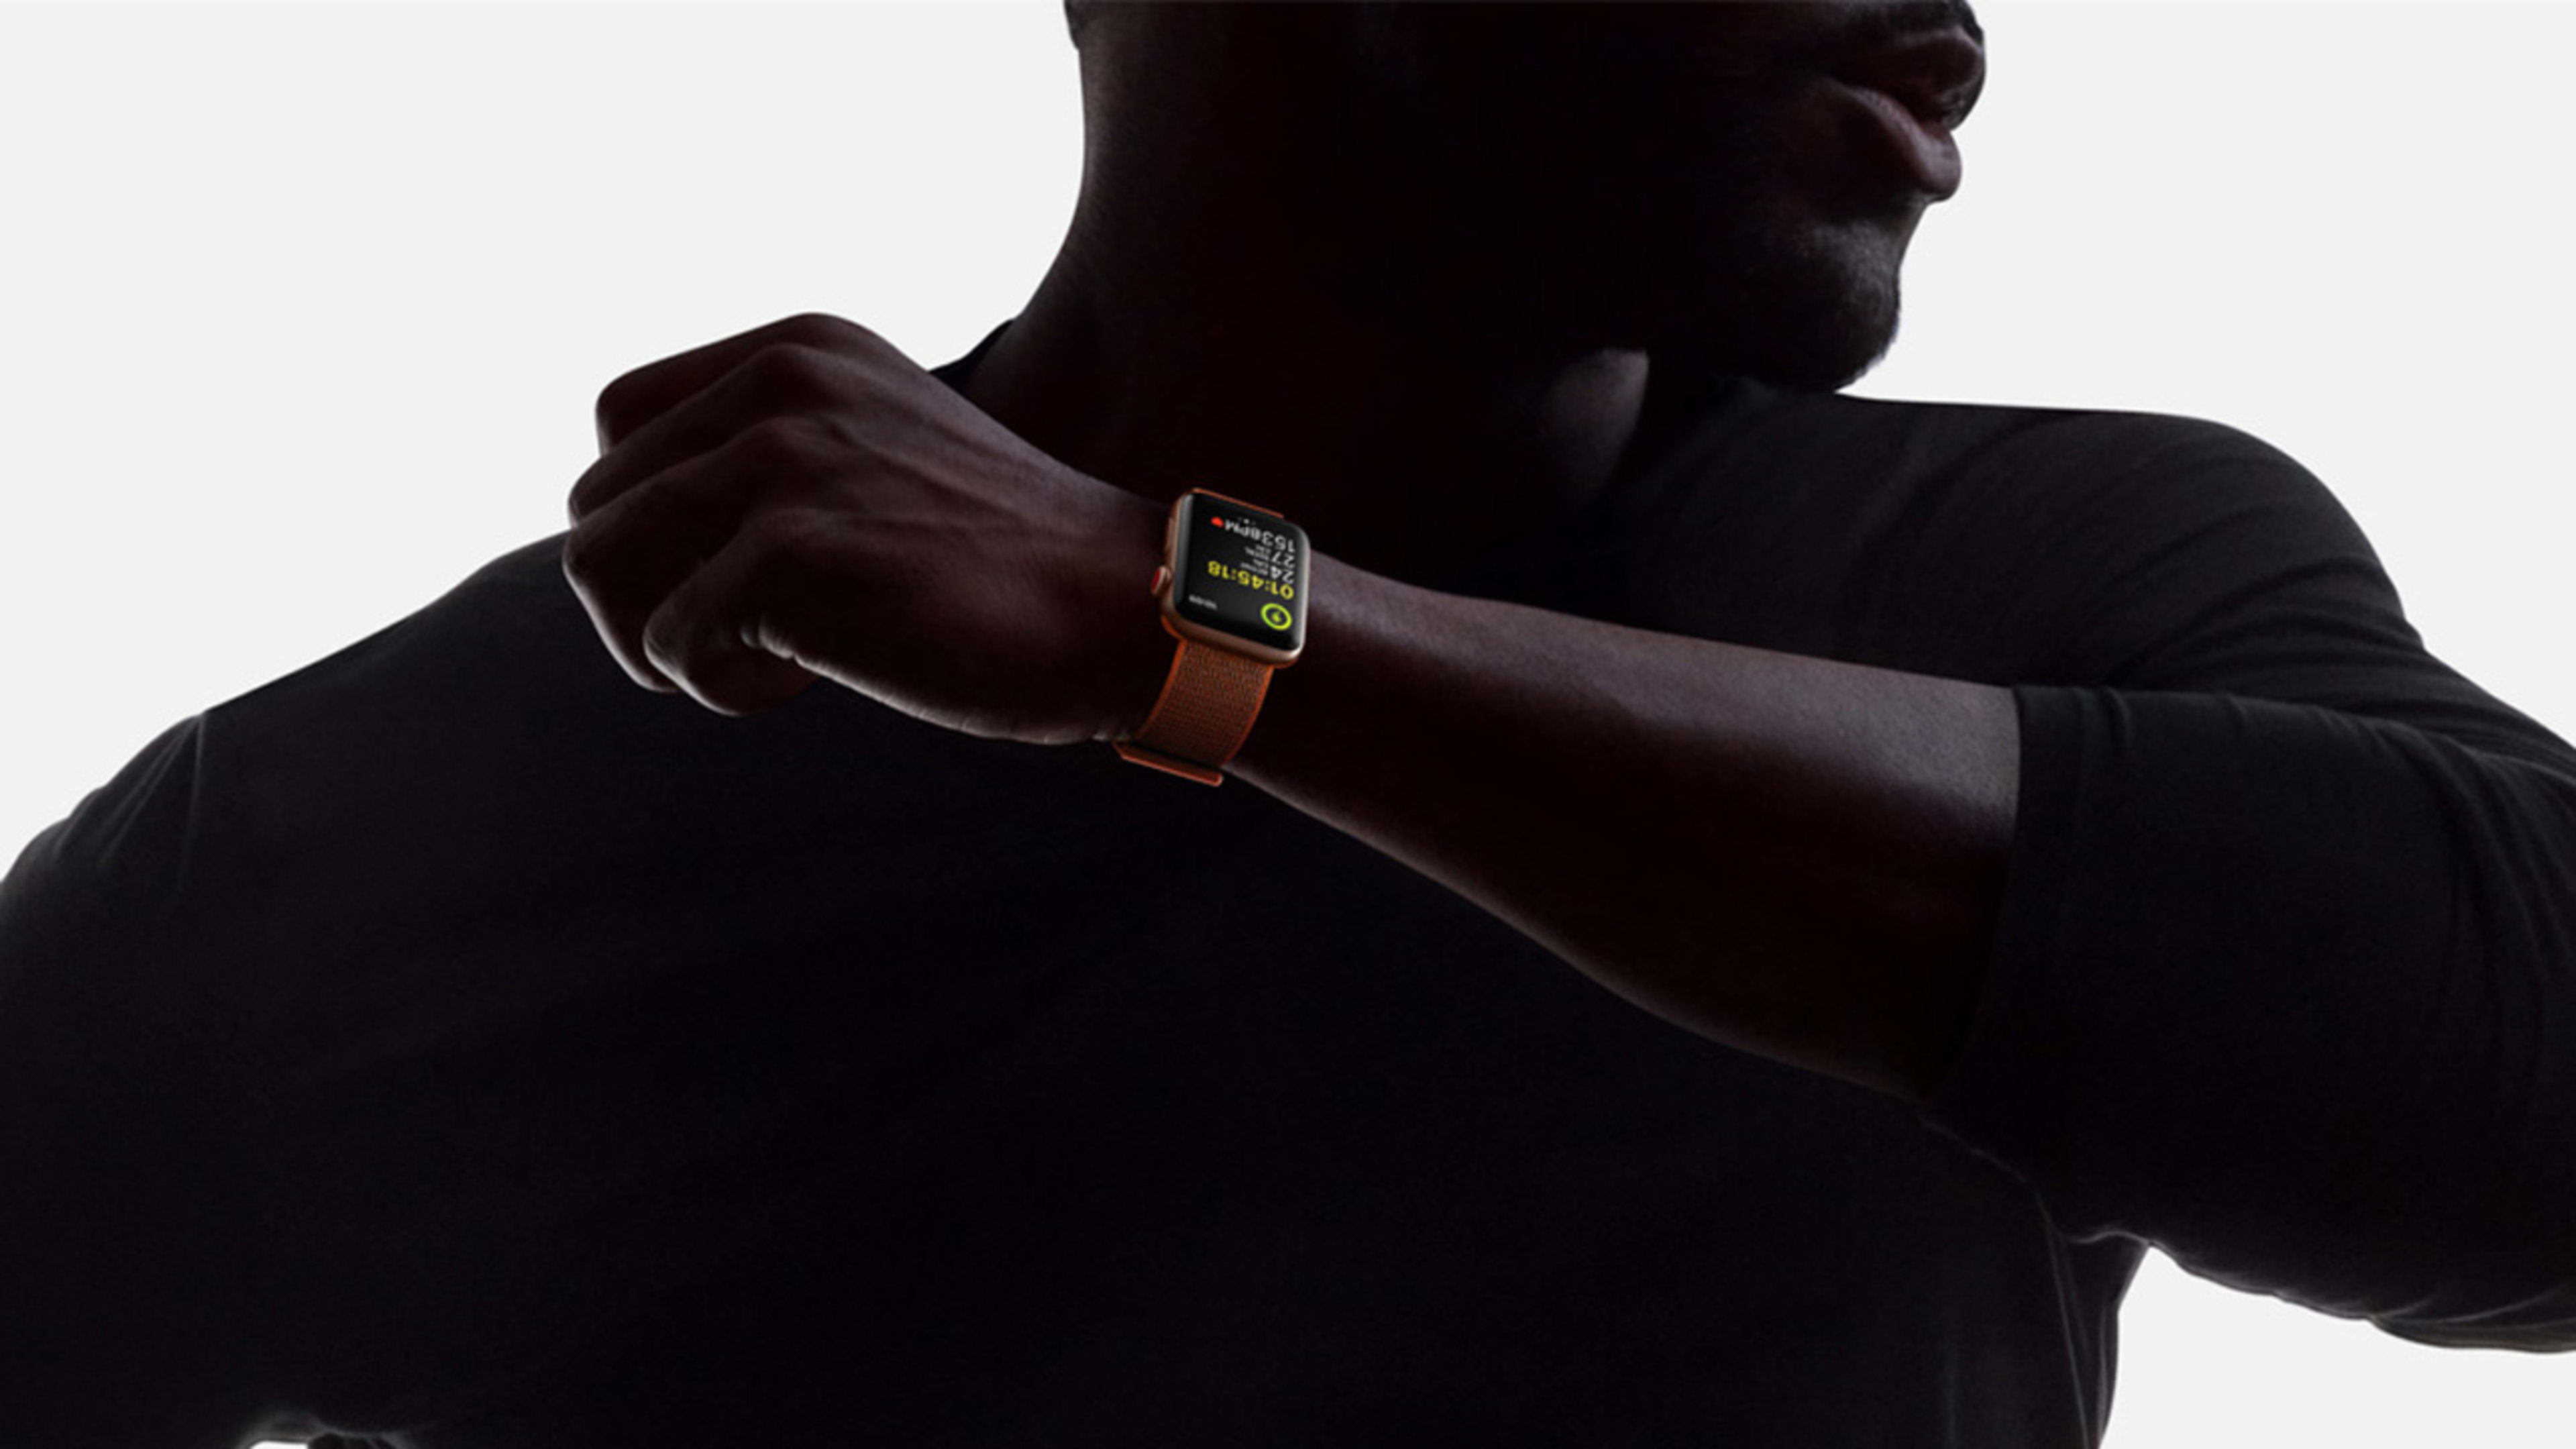 Apple is the world’s top wearables maker once again